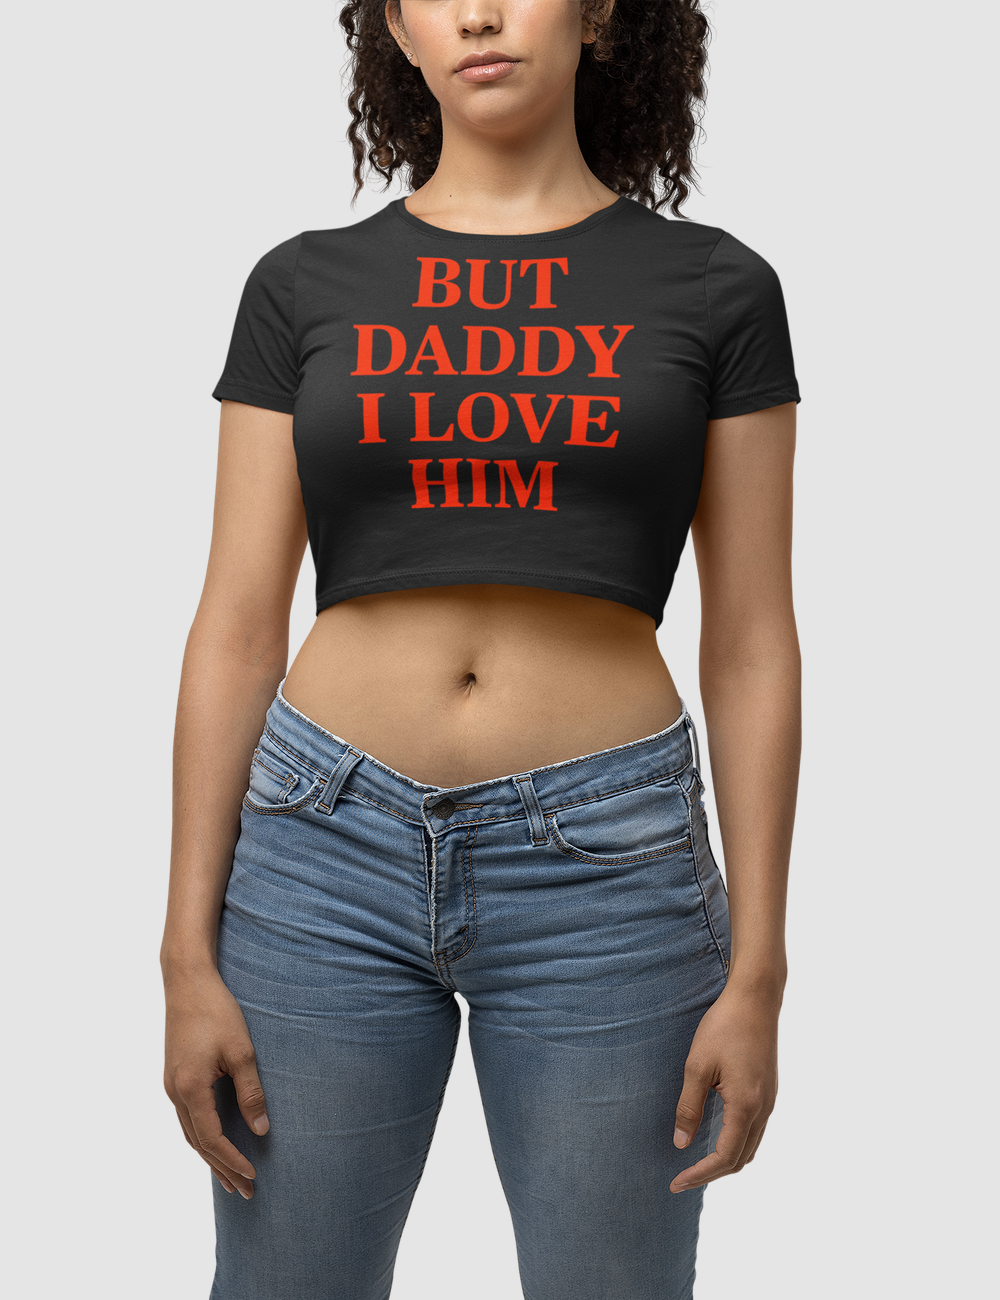 But Daddy I Love Him Women's Fitted Crop Top T-Shirt OniTakai